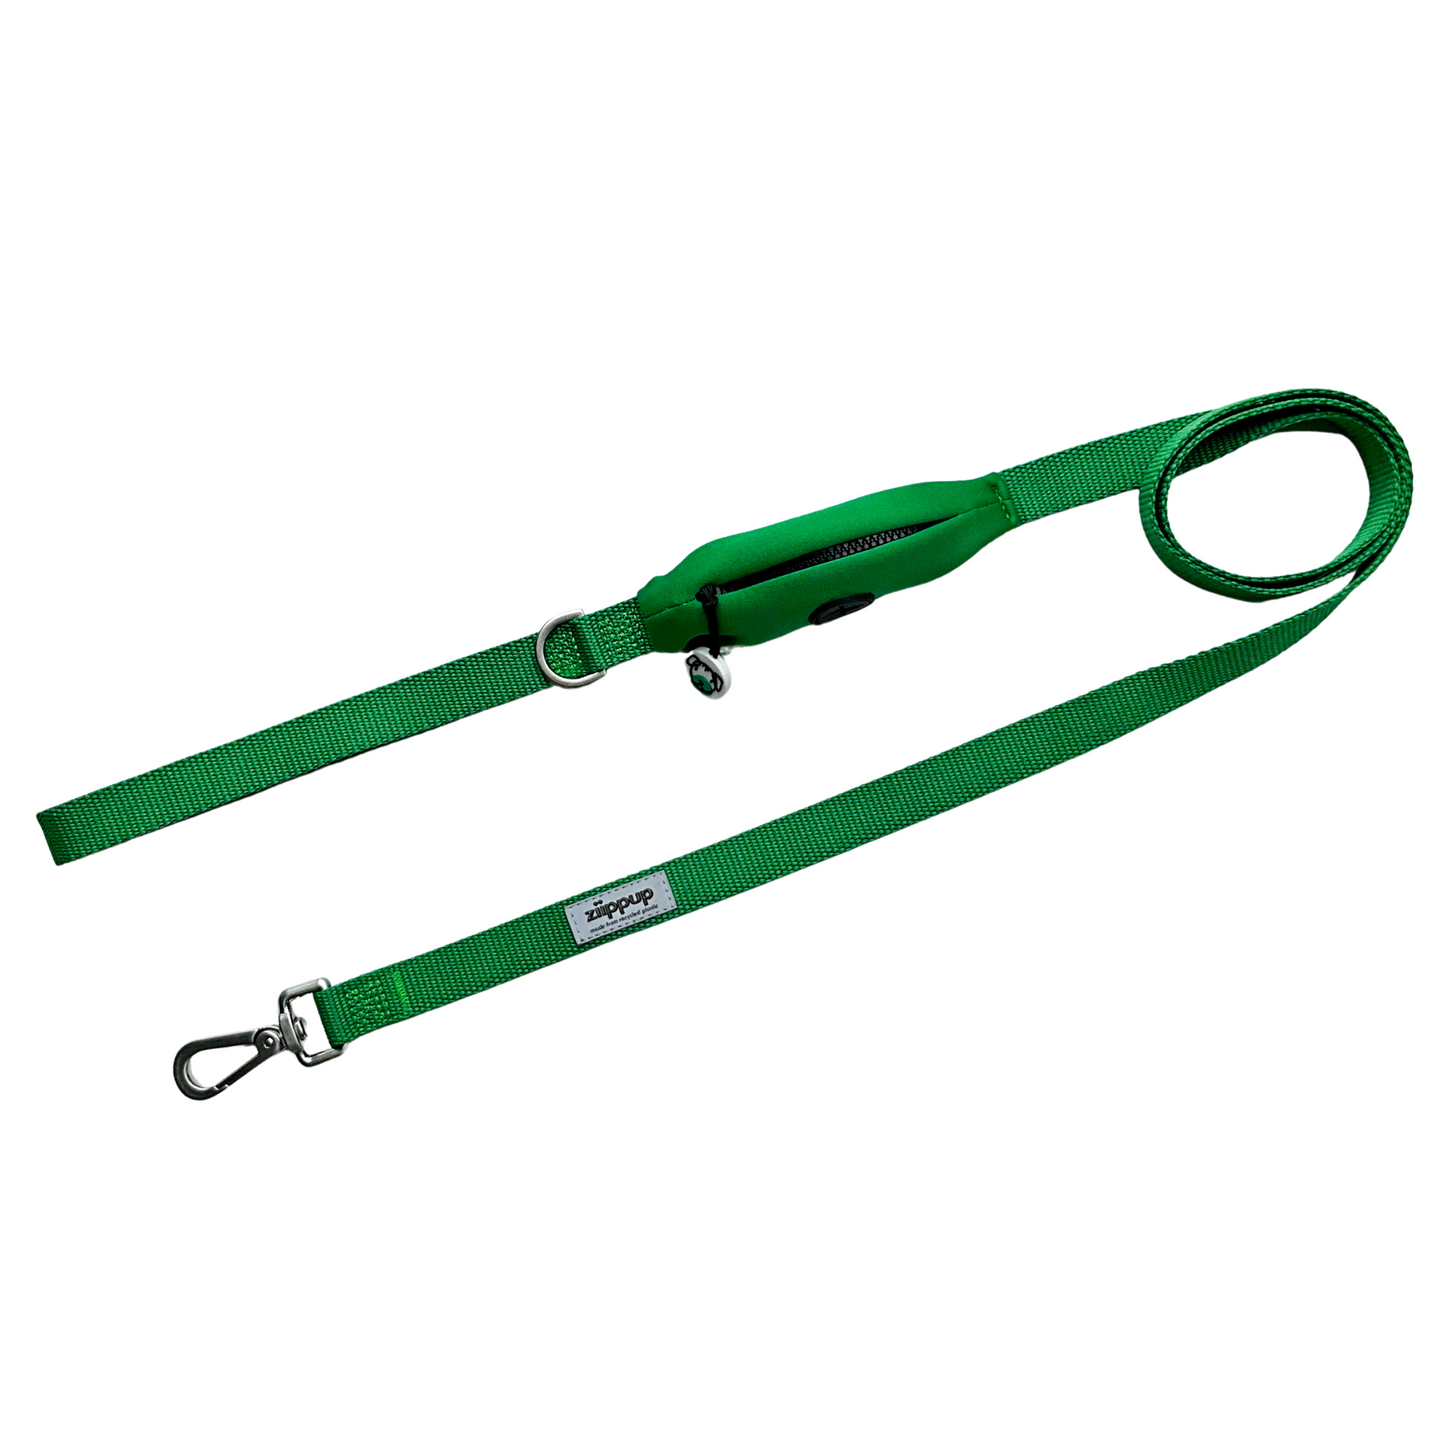 Green dog lead with poo bag holder